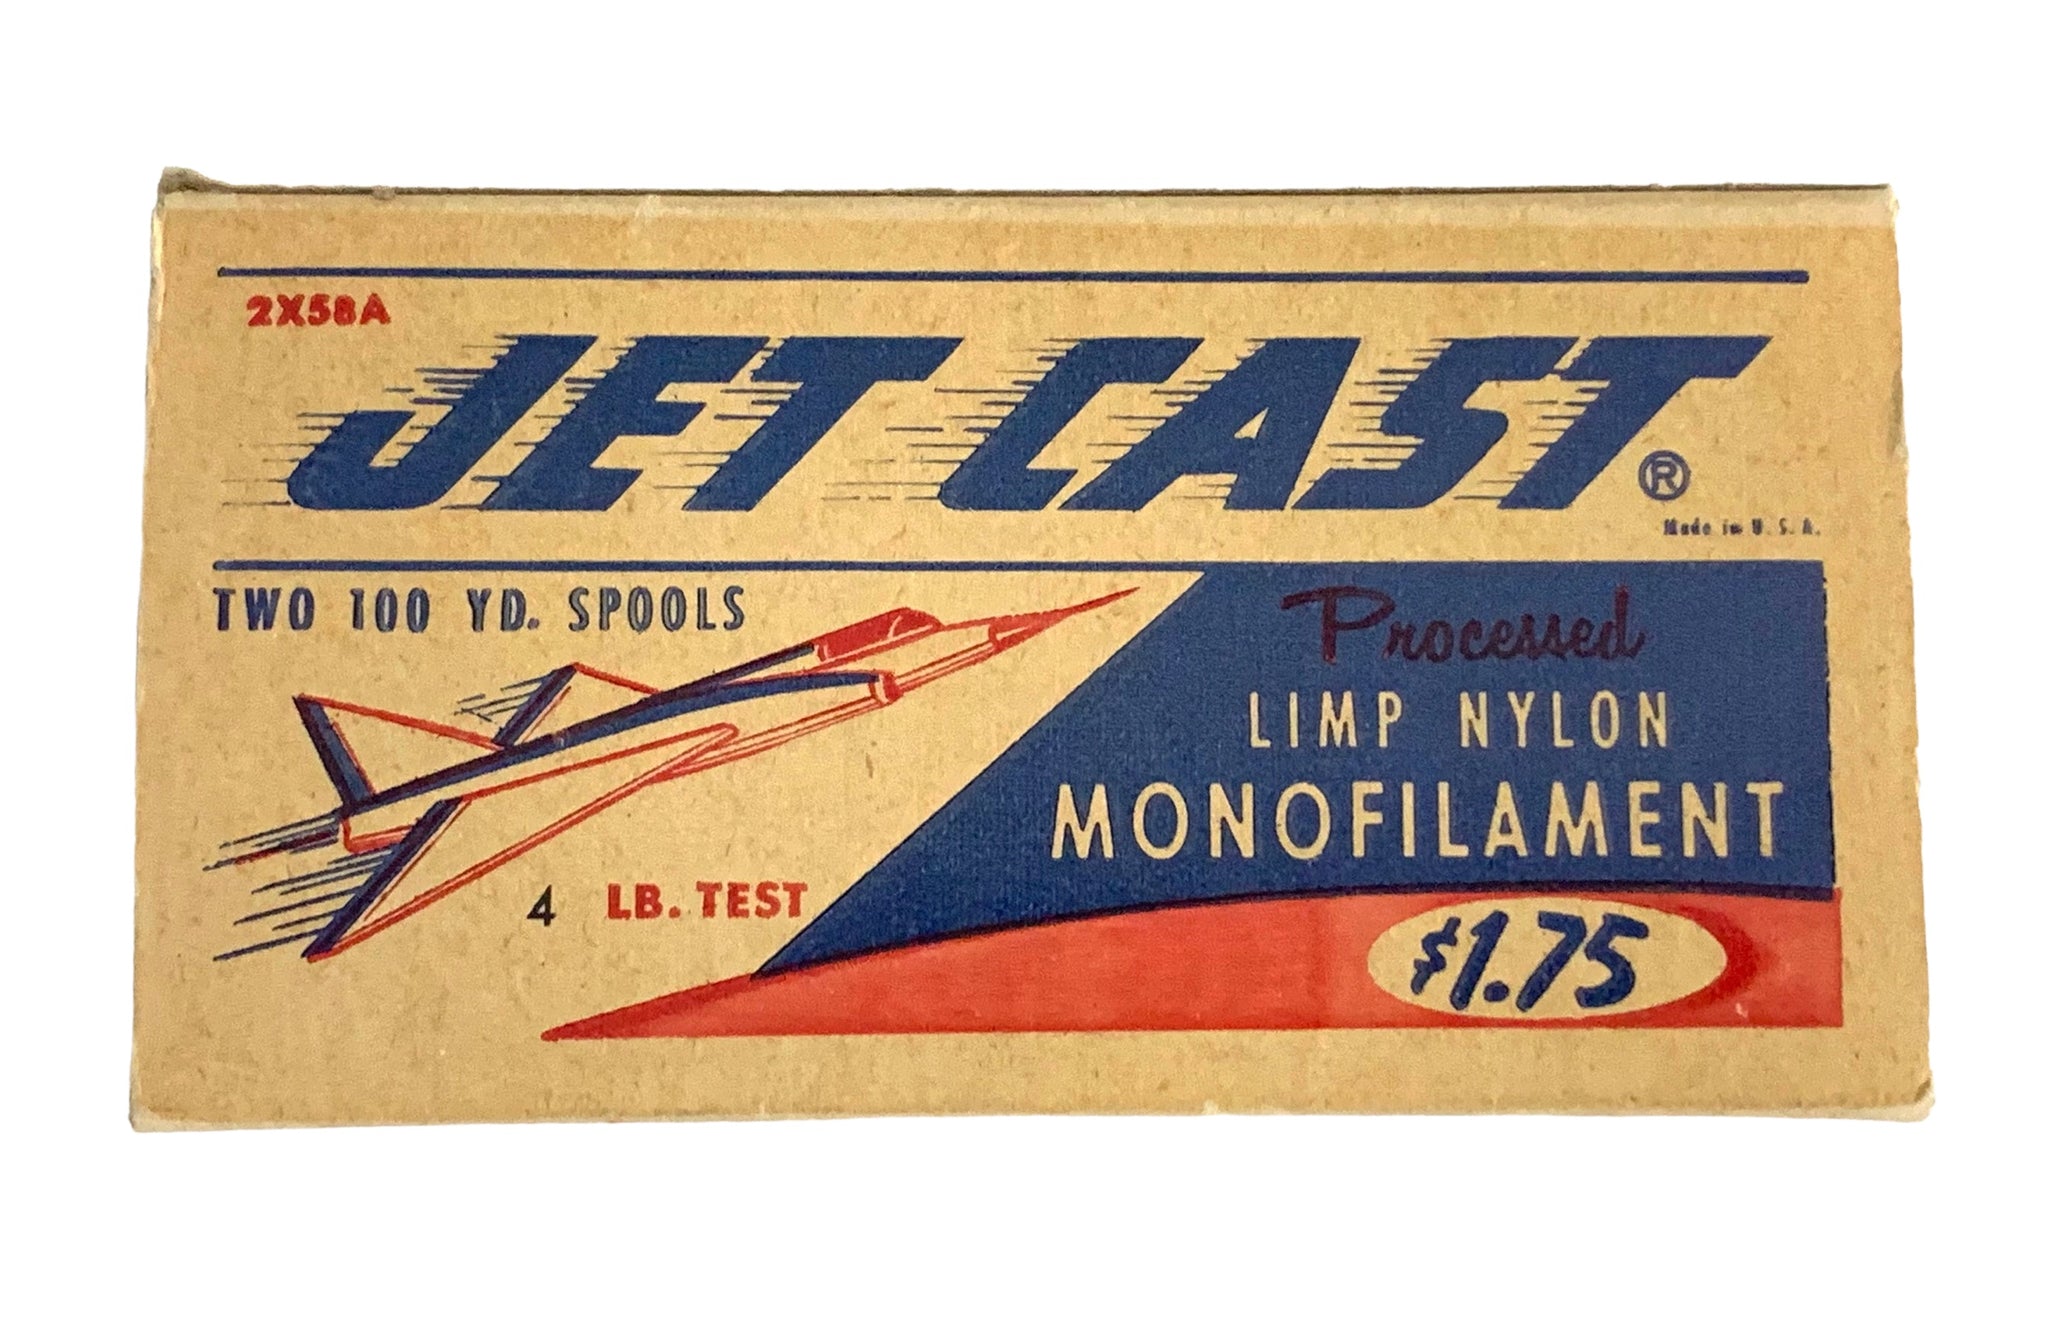 Vintage JET CAST 4 Lb Test Nylon Monofilament Fishing Line • Made in U –  Toad Tackle